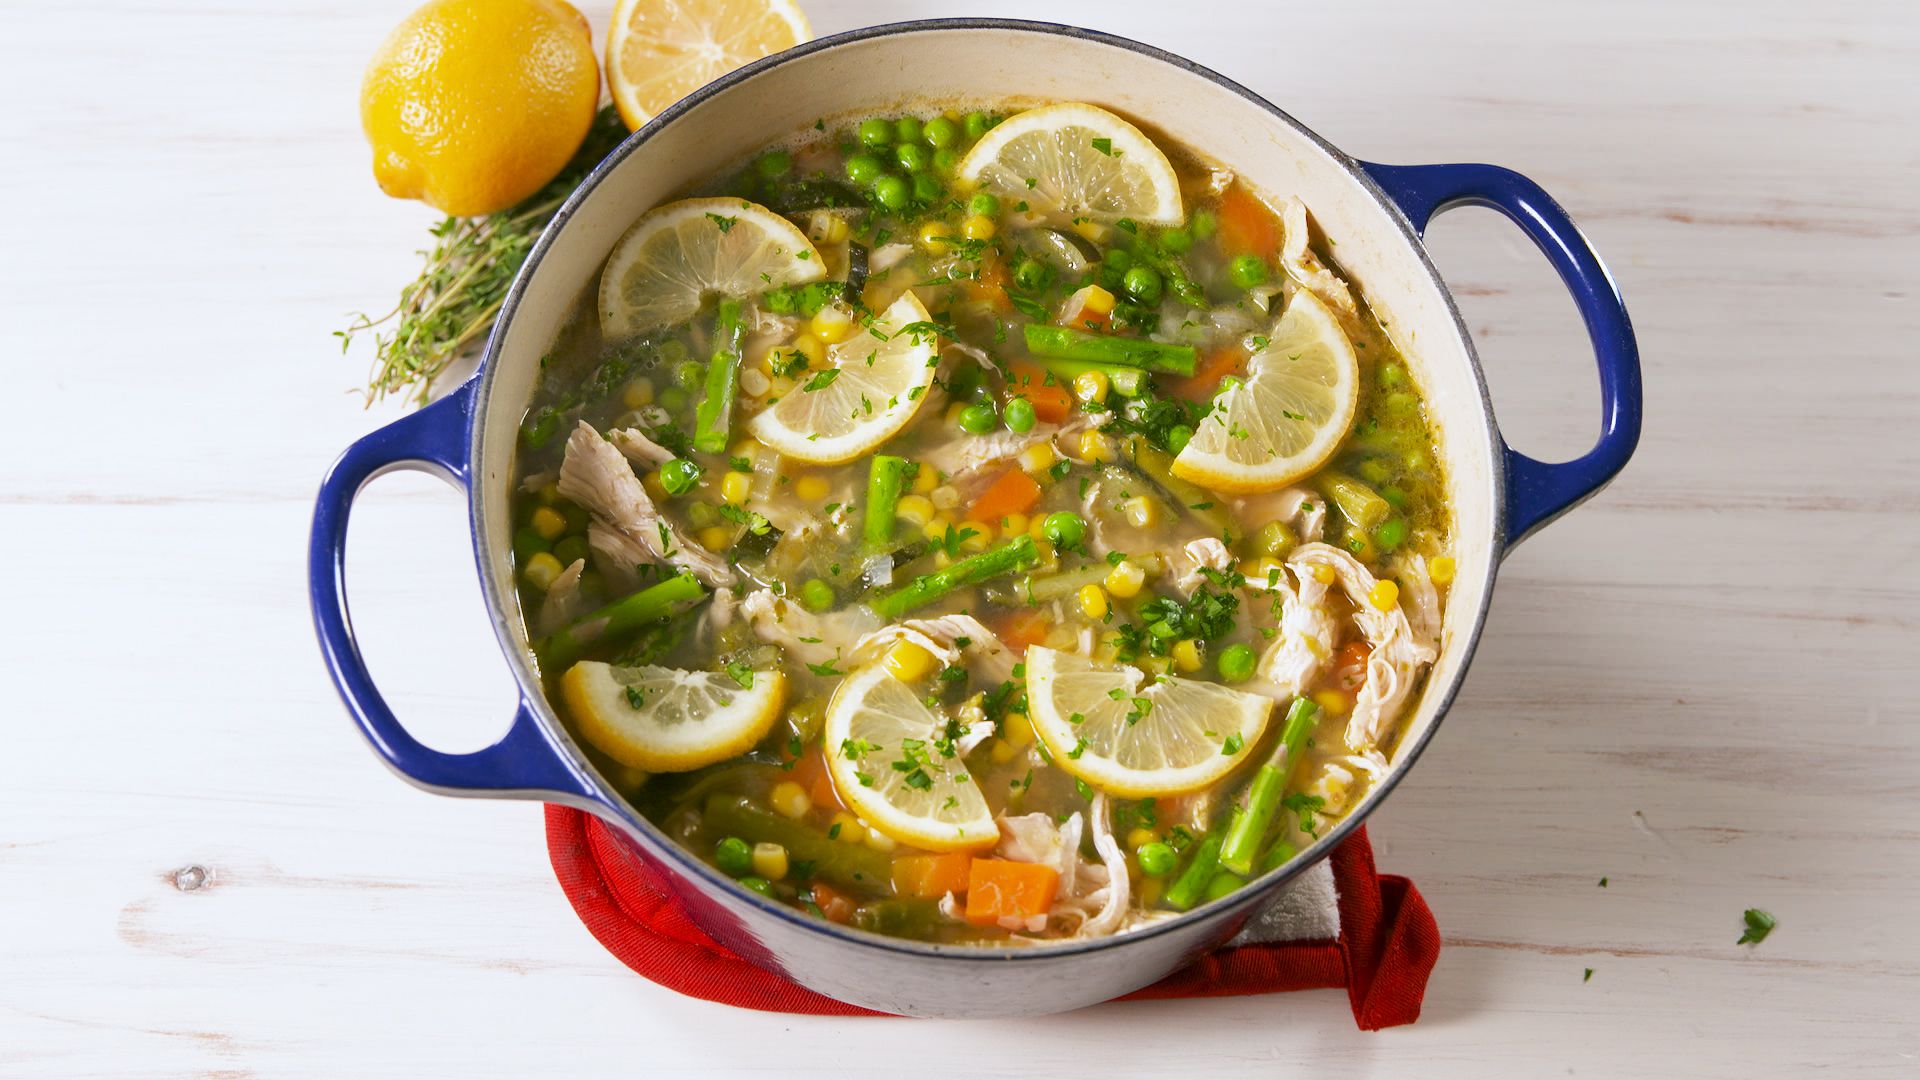 Best Spring Chicken Soup Recipe - How to Make Spring Chicken Soup